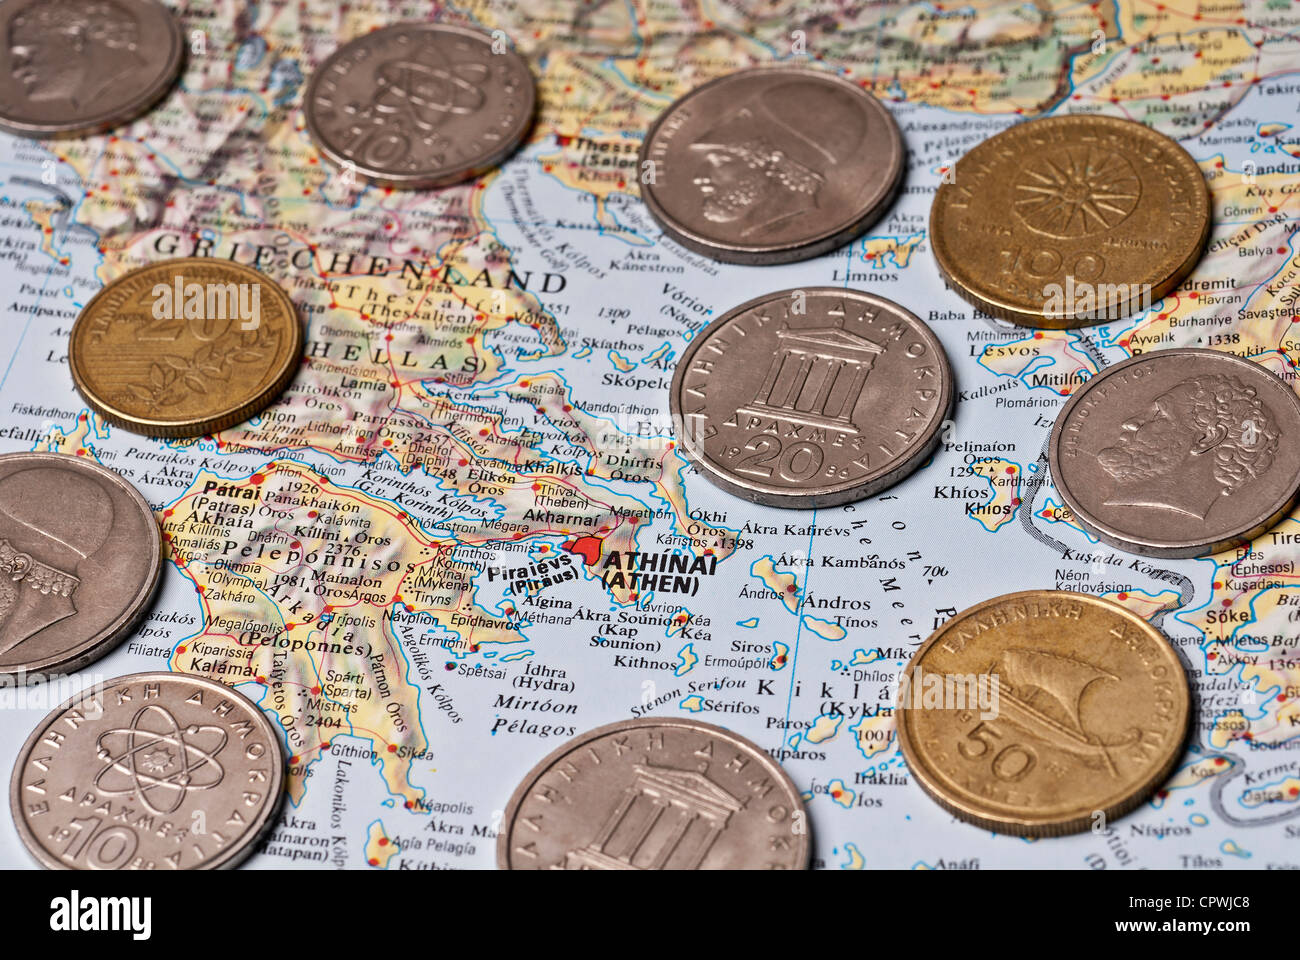 A map of Greece with many drachma coins. Stock Photo